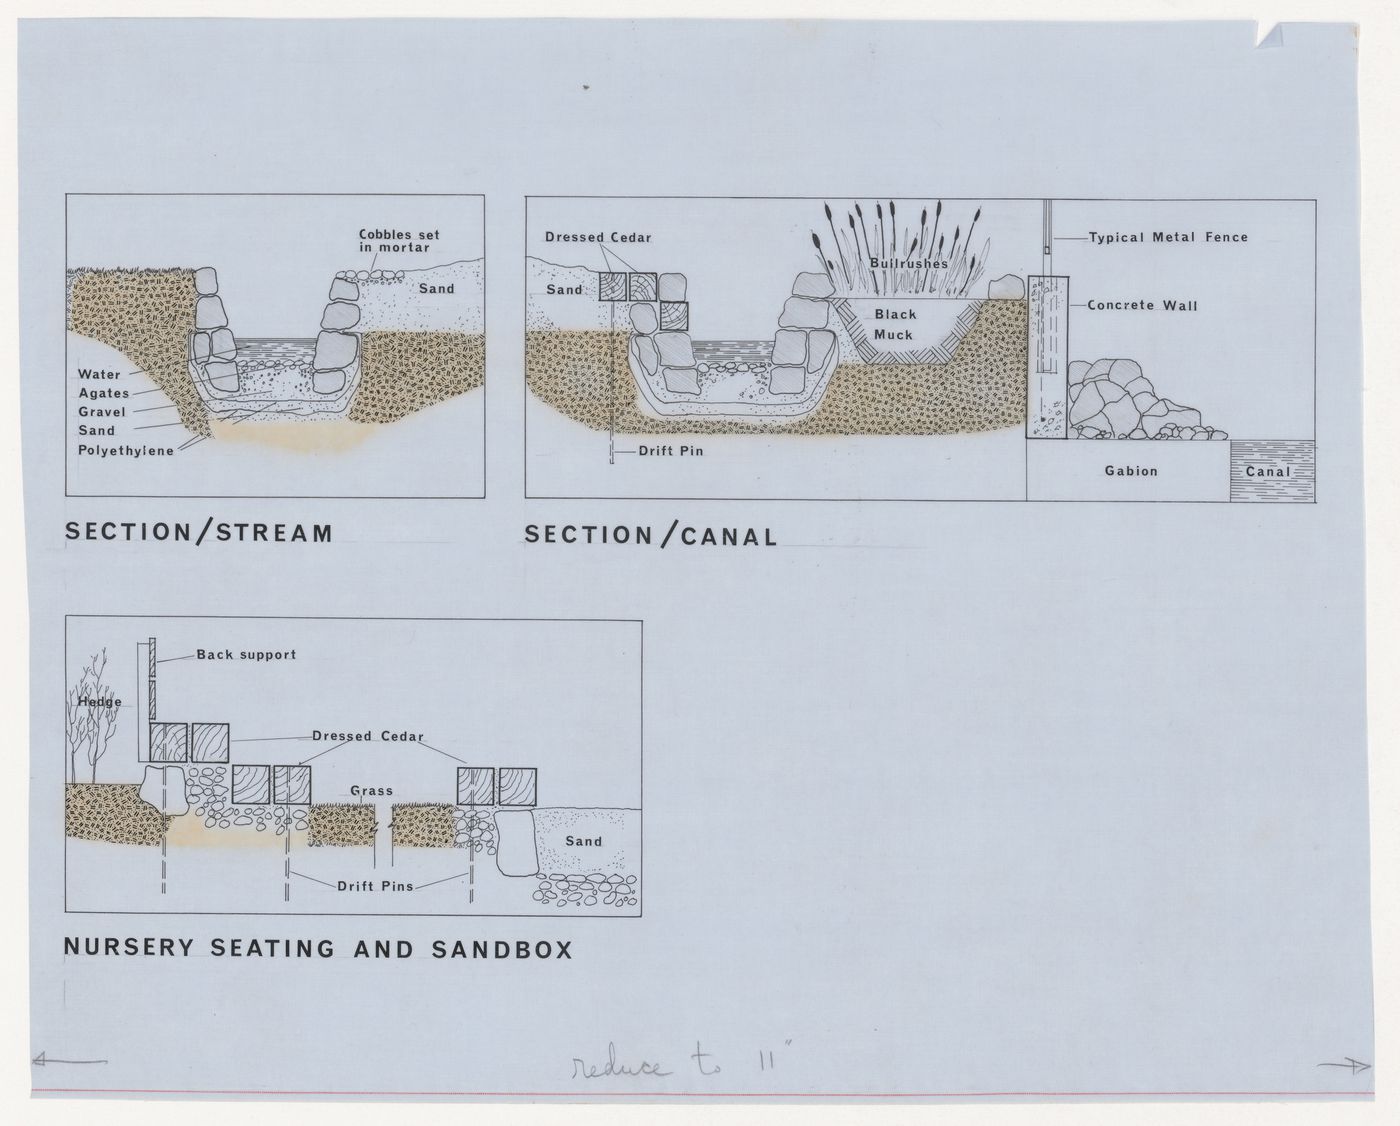 Sections for stream, canal, nursery seating, and sandbox for Children's Creative Centre Playground, Canadian Federal Pavilion, Expo '67, Montréal, Québec